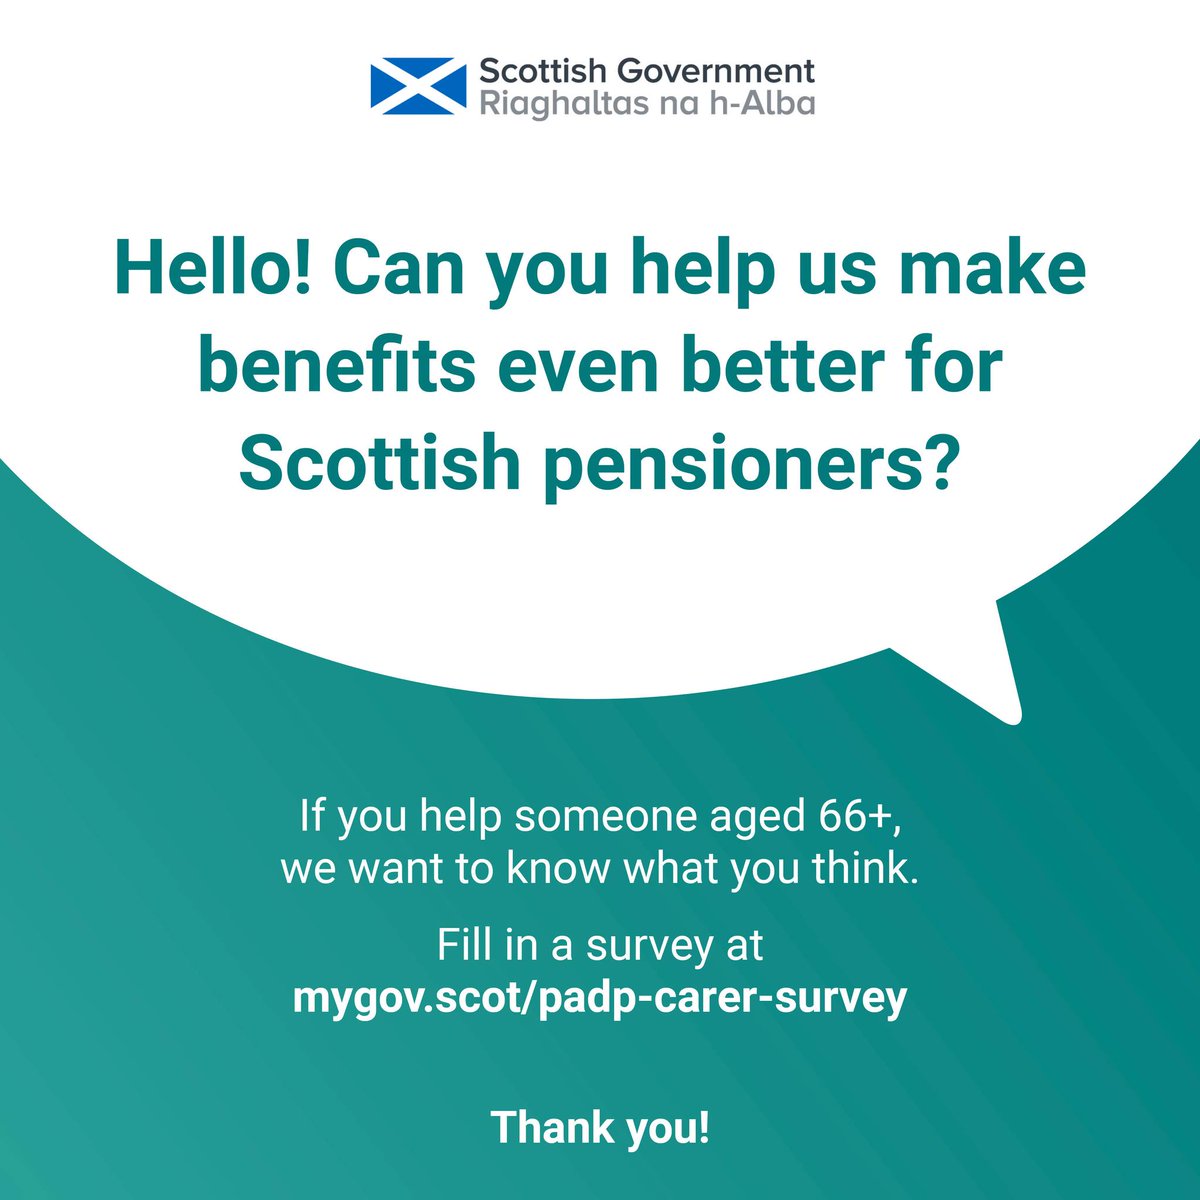 The Scottish Government is designing a new benefit called Pension Age Disability Payment. As part of their research, they would like to speak to carers. If you help someone who is aged over 66 years old, please fill out this short survey: mygov.scot/padp-carer-sur…